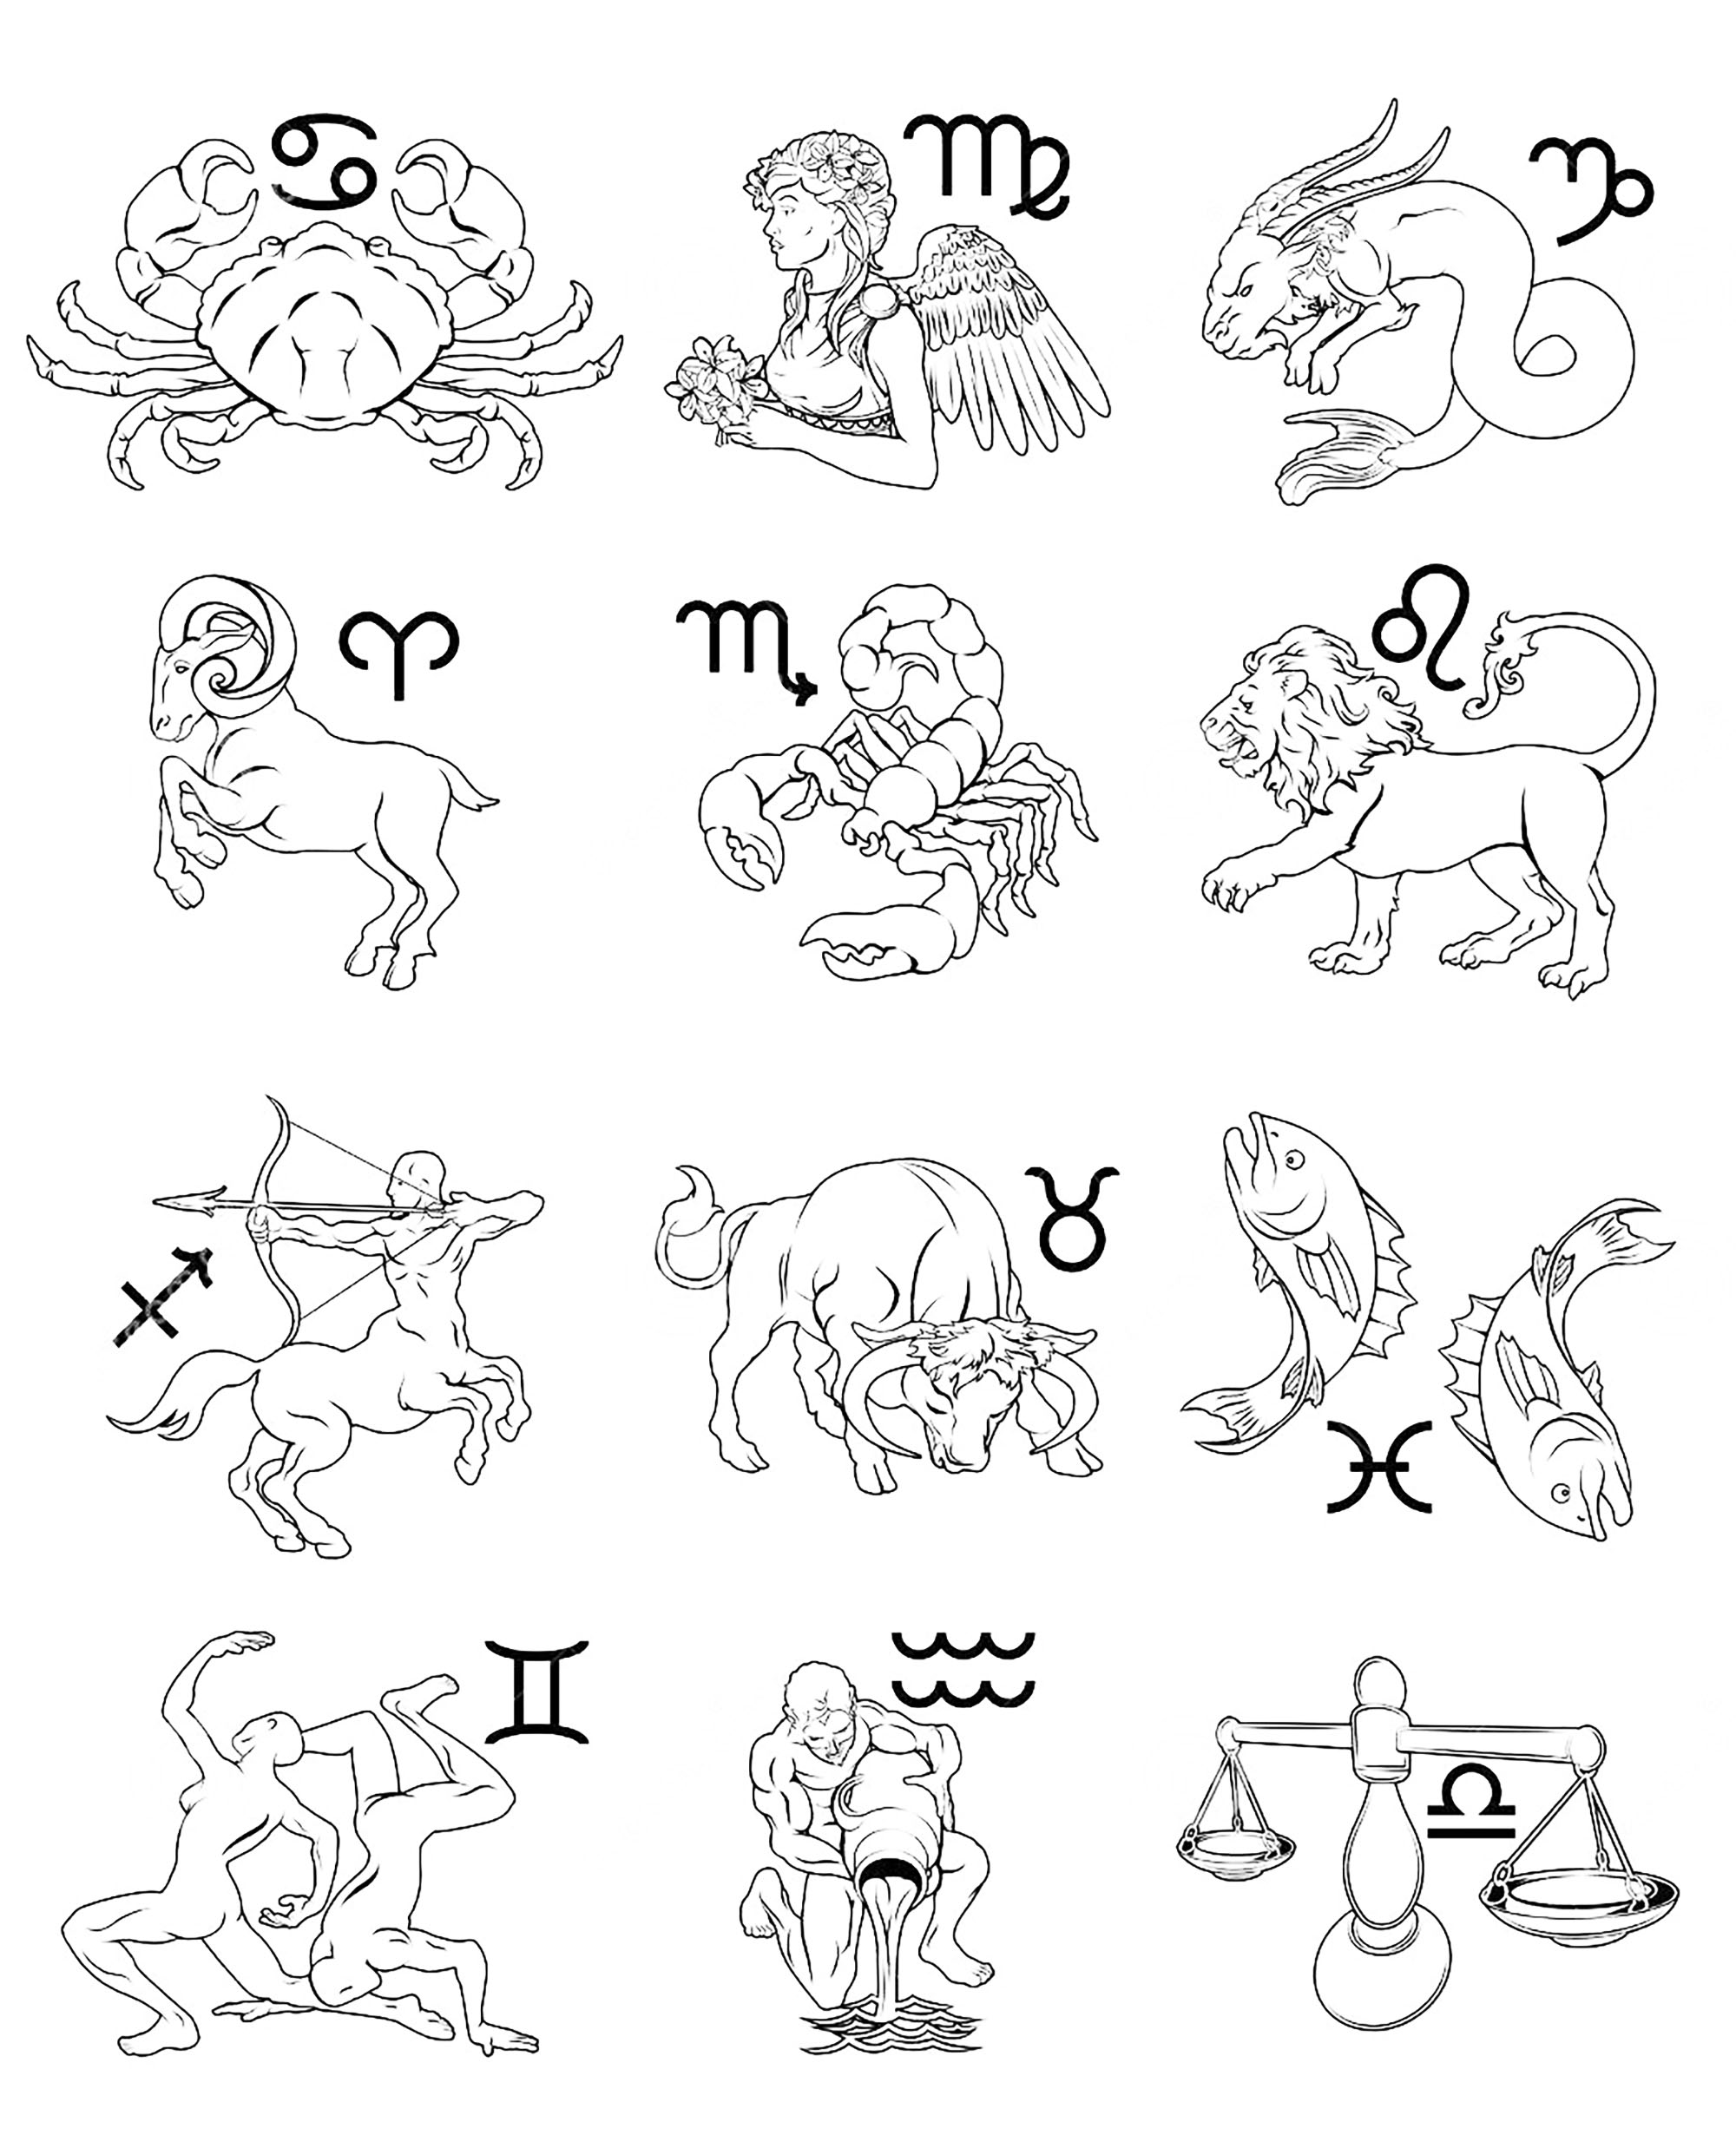 The 12 Zodiac Signs. Perfect to color if you like Astrology